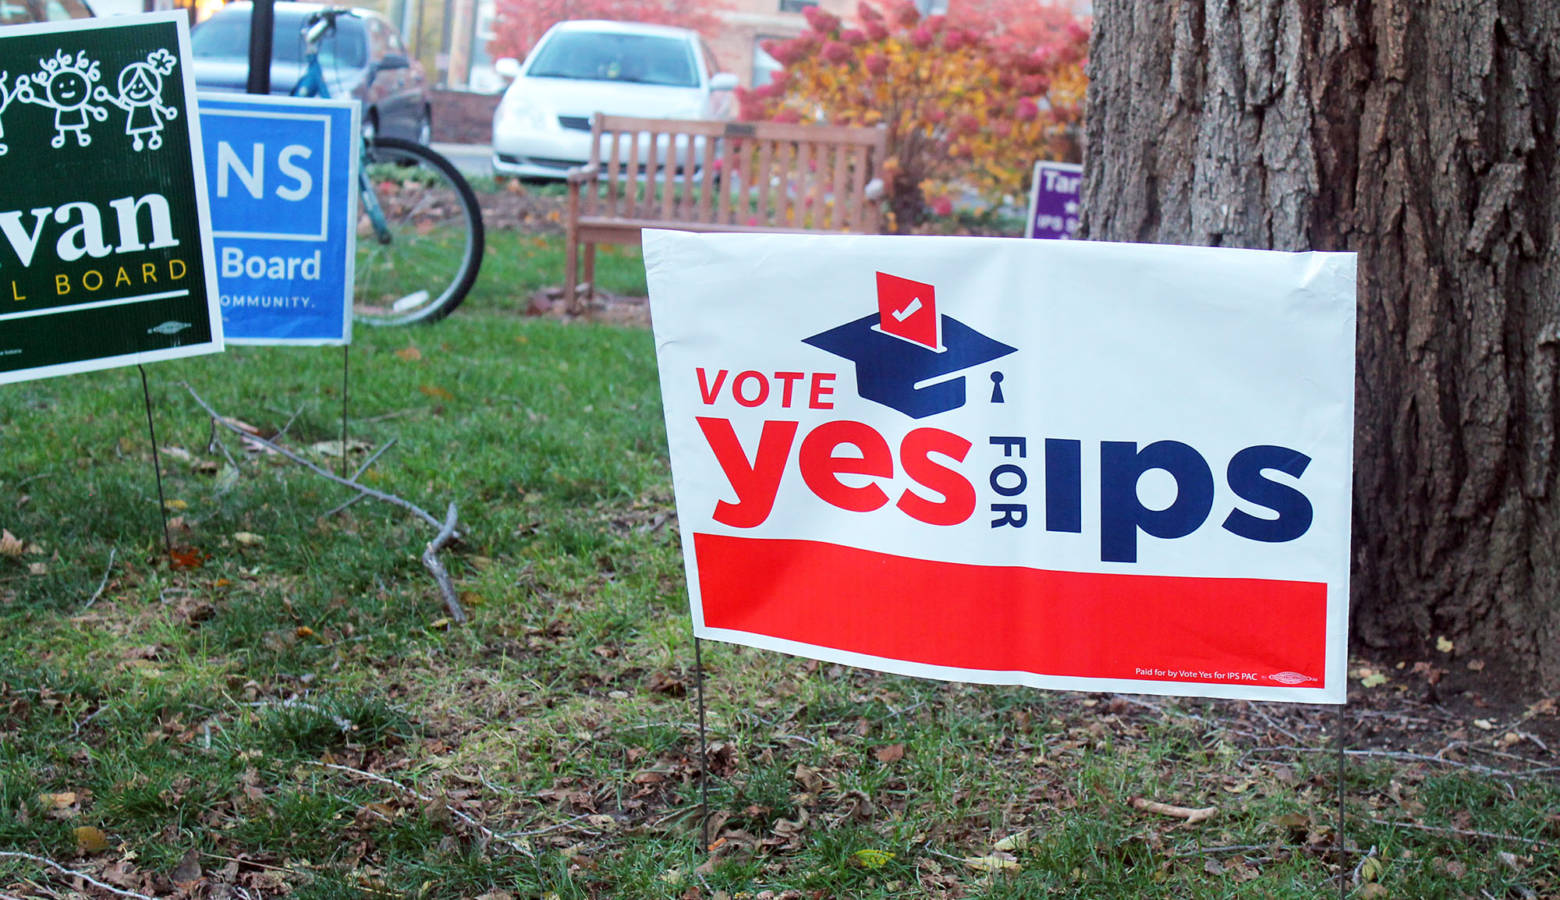 Indianapolis Public Schools was one of 10 school corporations with referenda on the ballot this November, that also won approval from voters. (Lauren Chapman/IPB News)